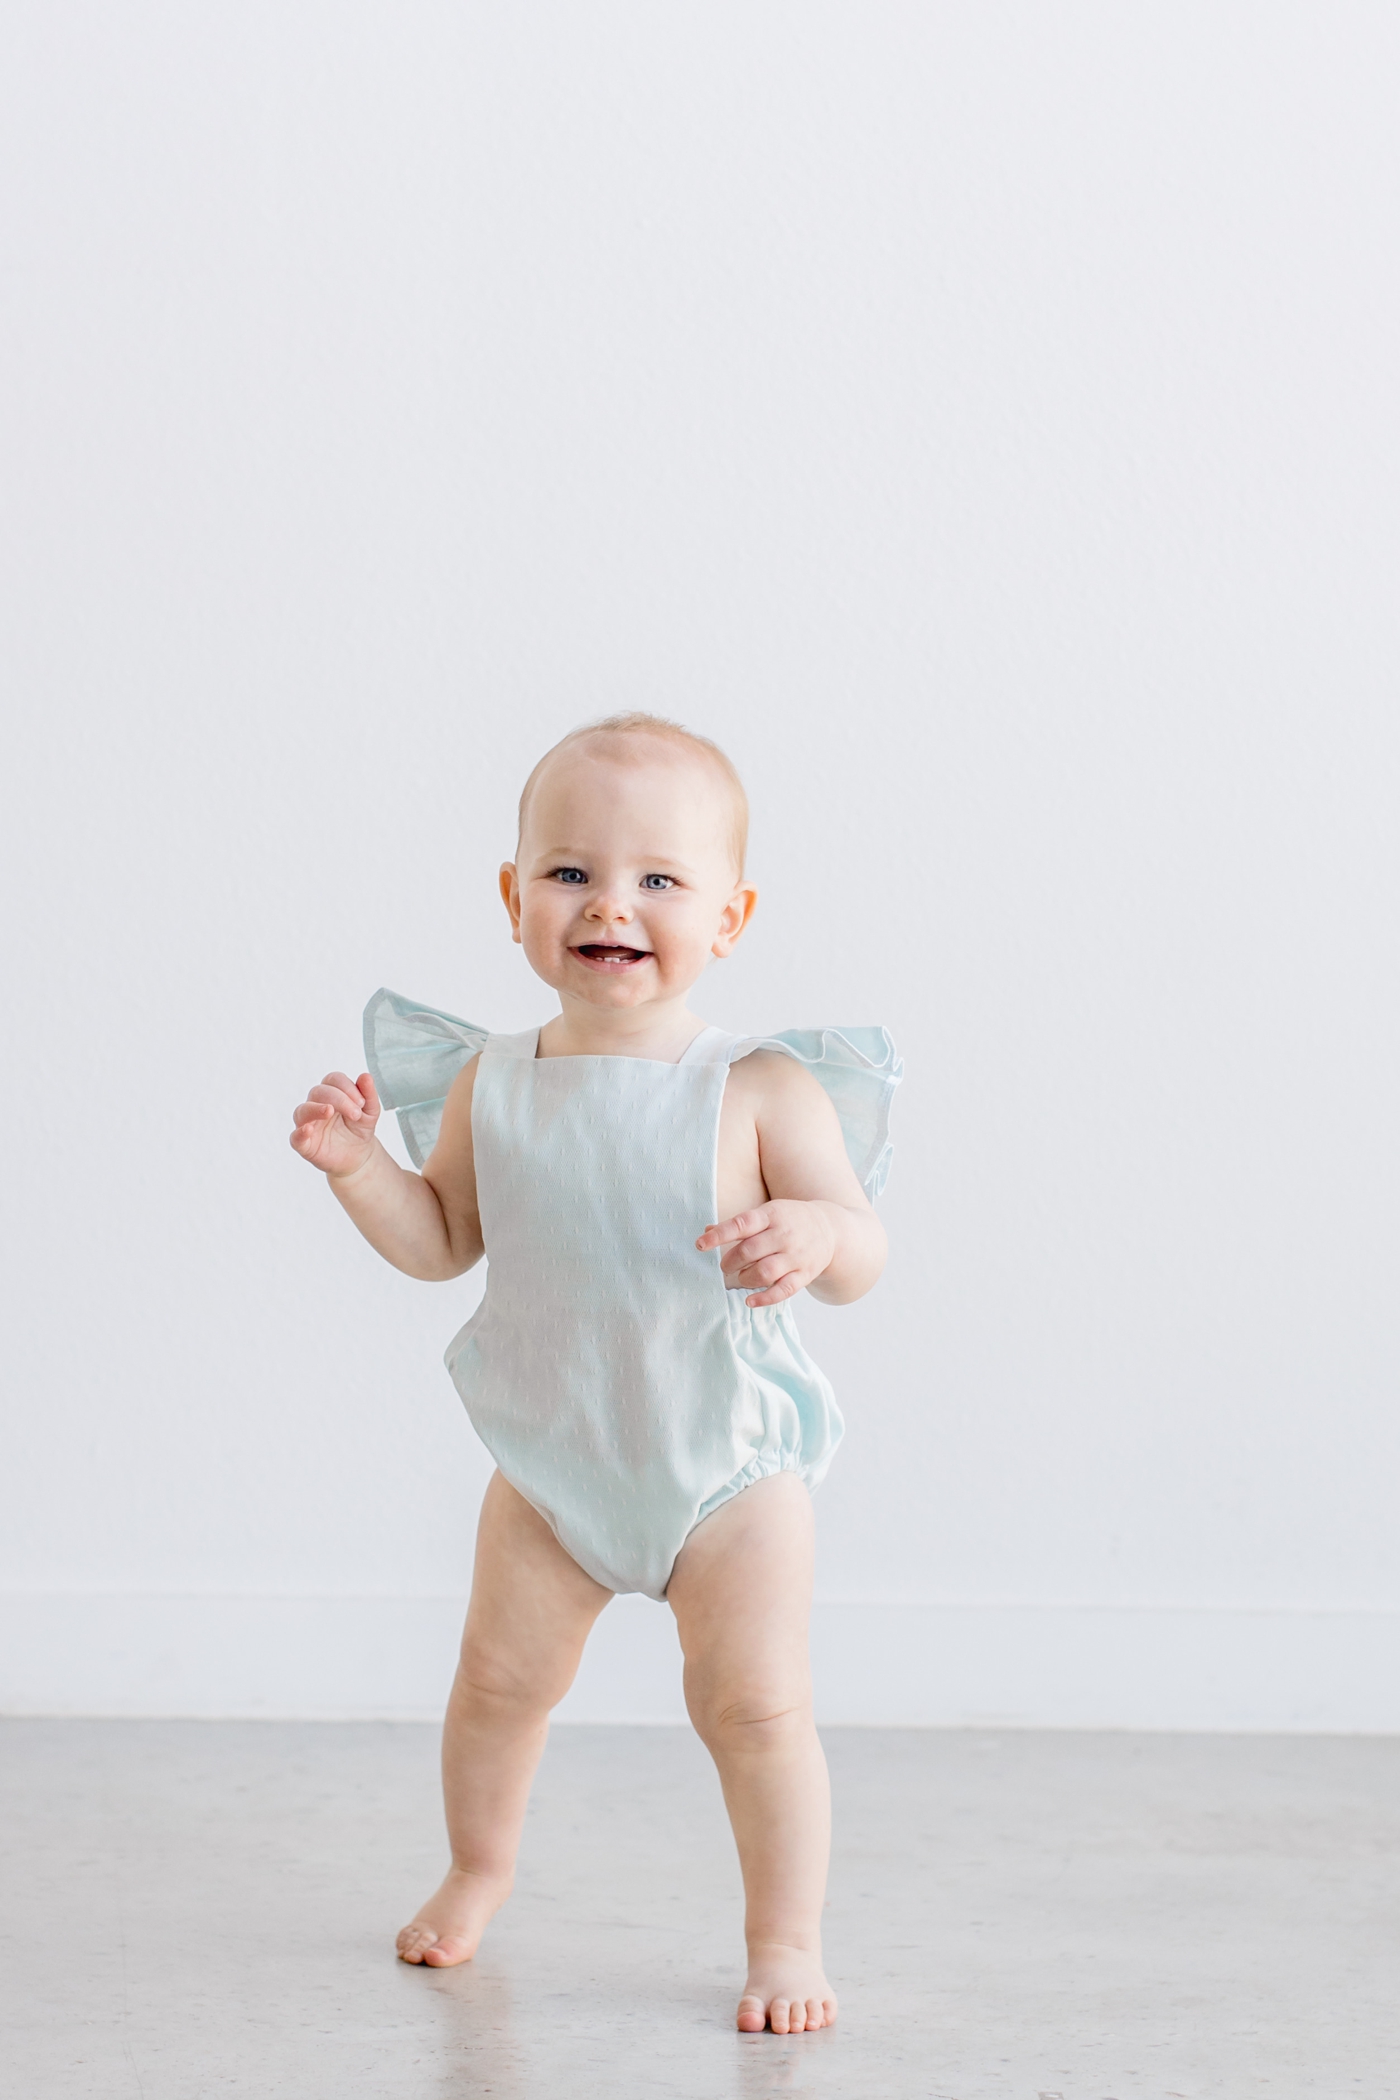 Toddler smiling and walking in studio milestone session. Photo by Sana Ahmed Photography.